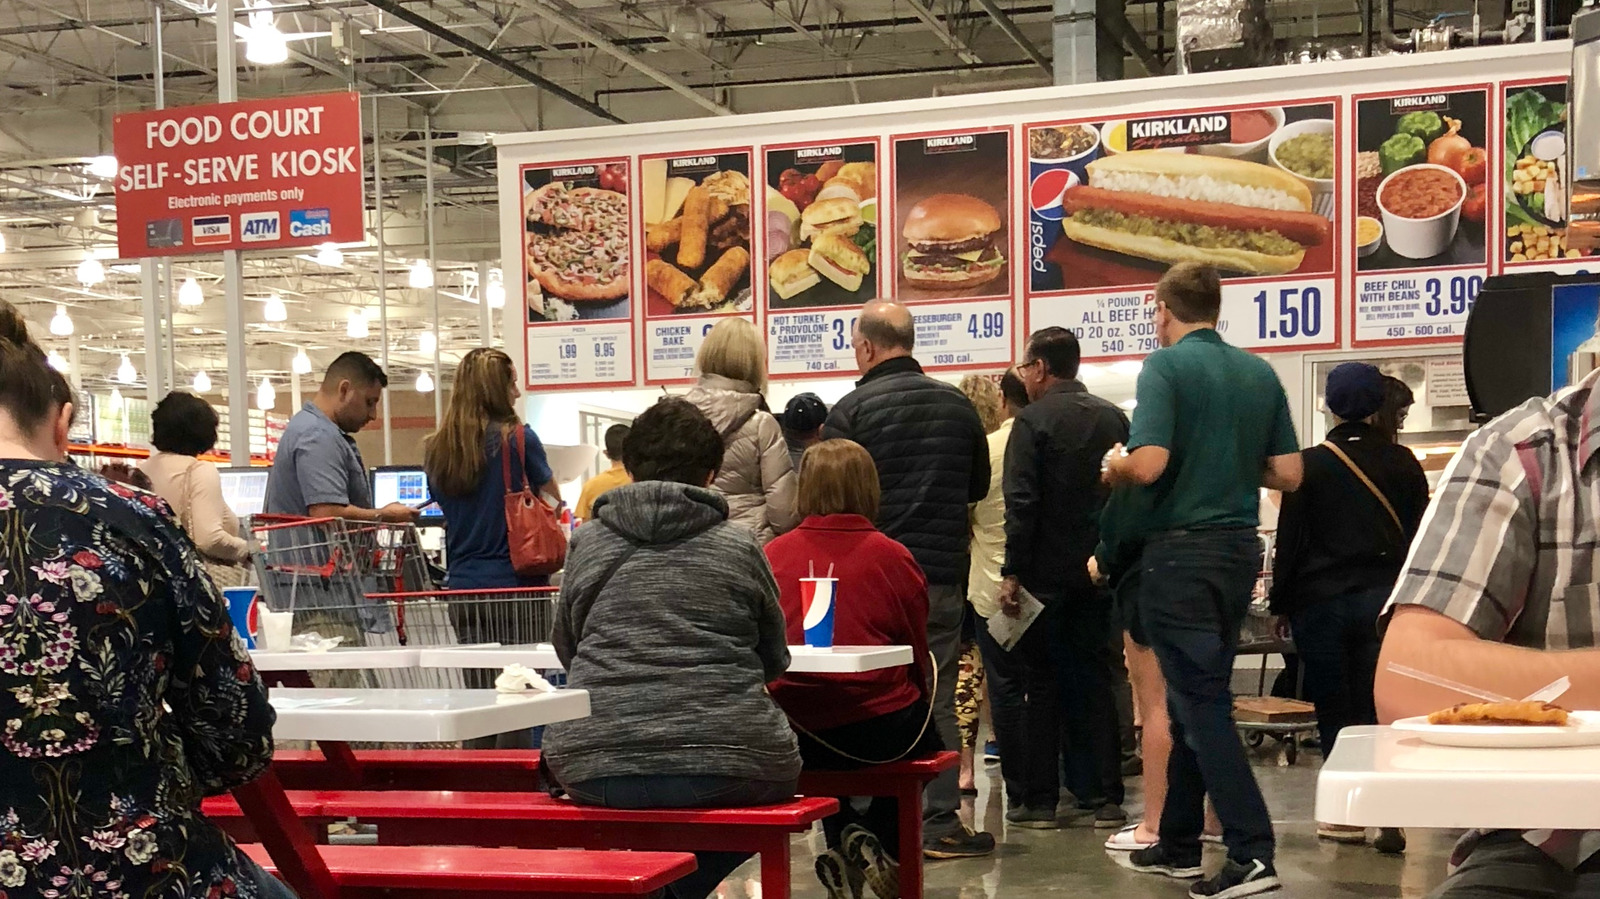 Sam s Club Vs Costco: Who s Winning The Battle For Best Food Court?